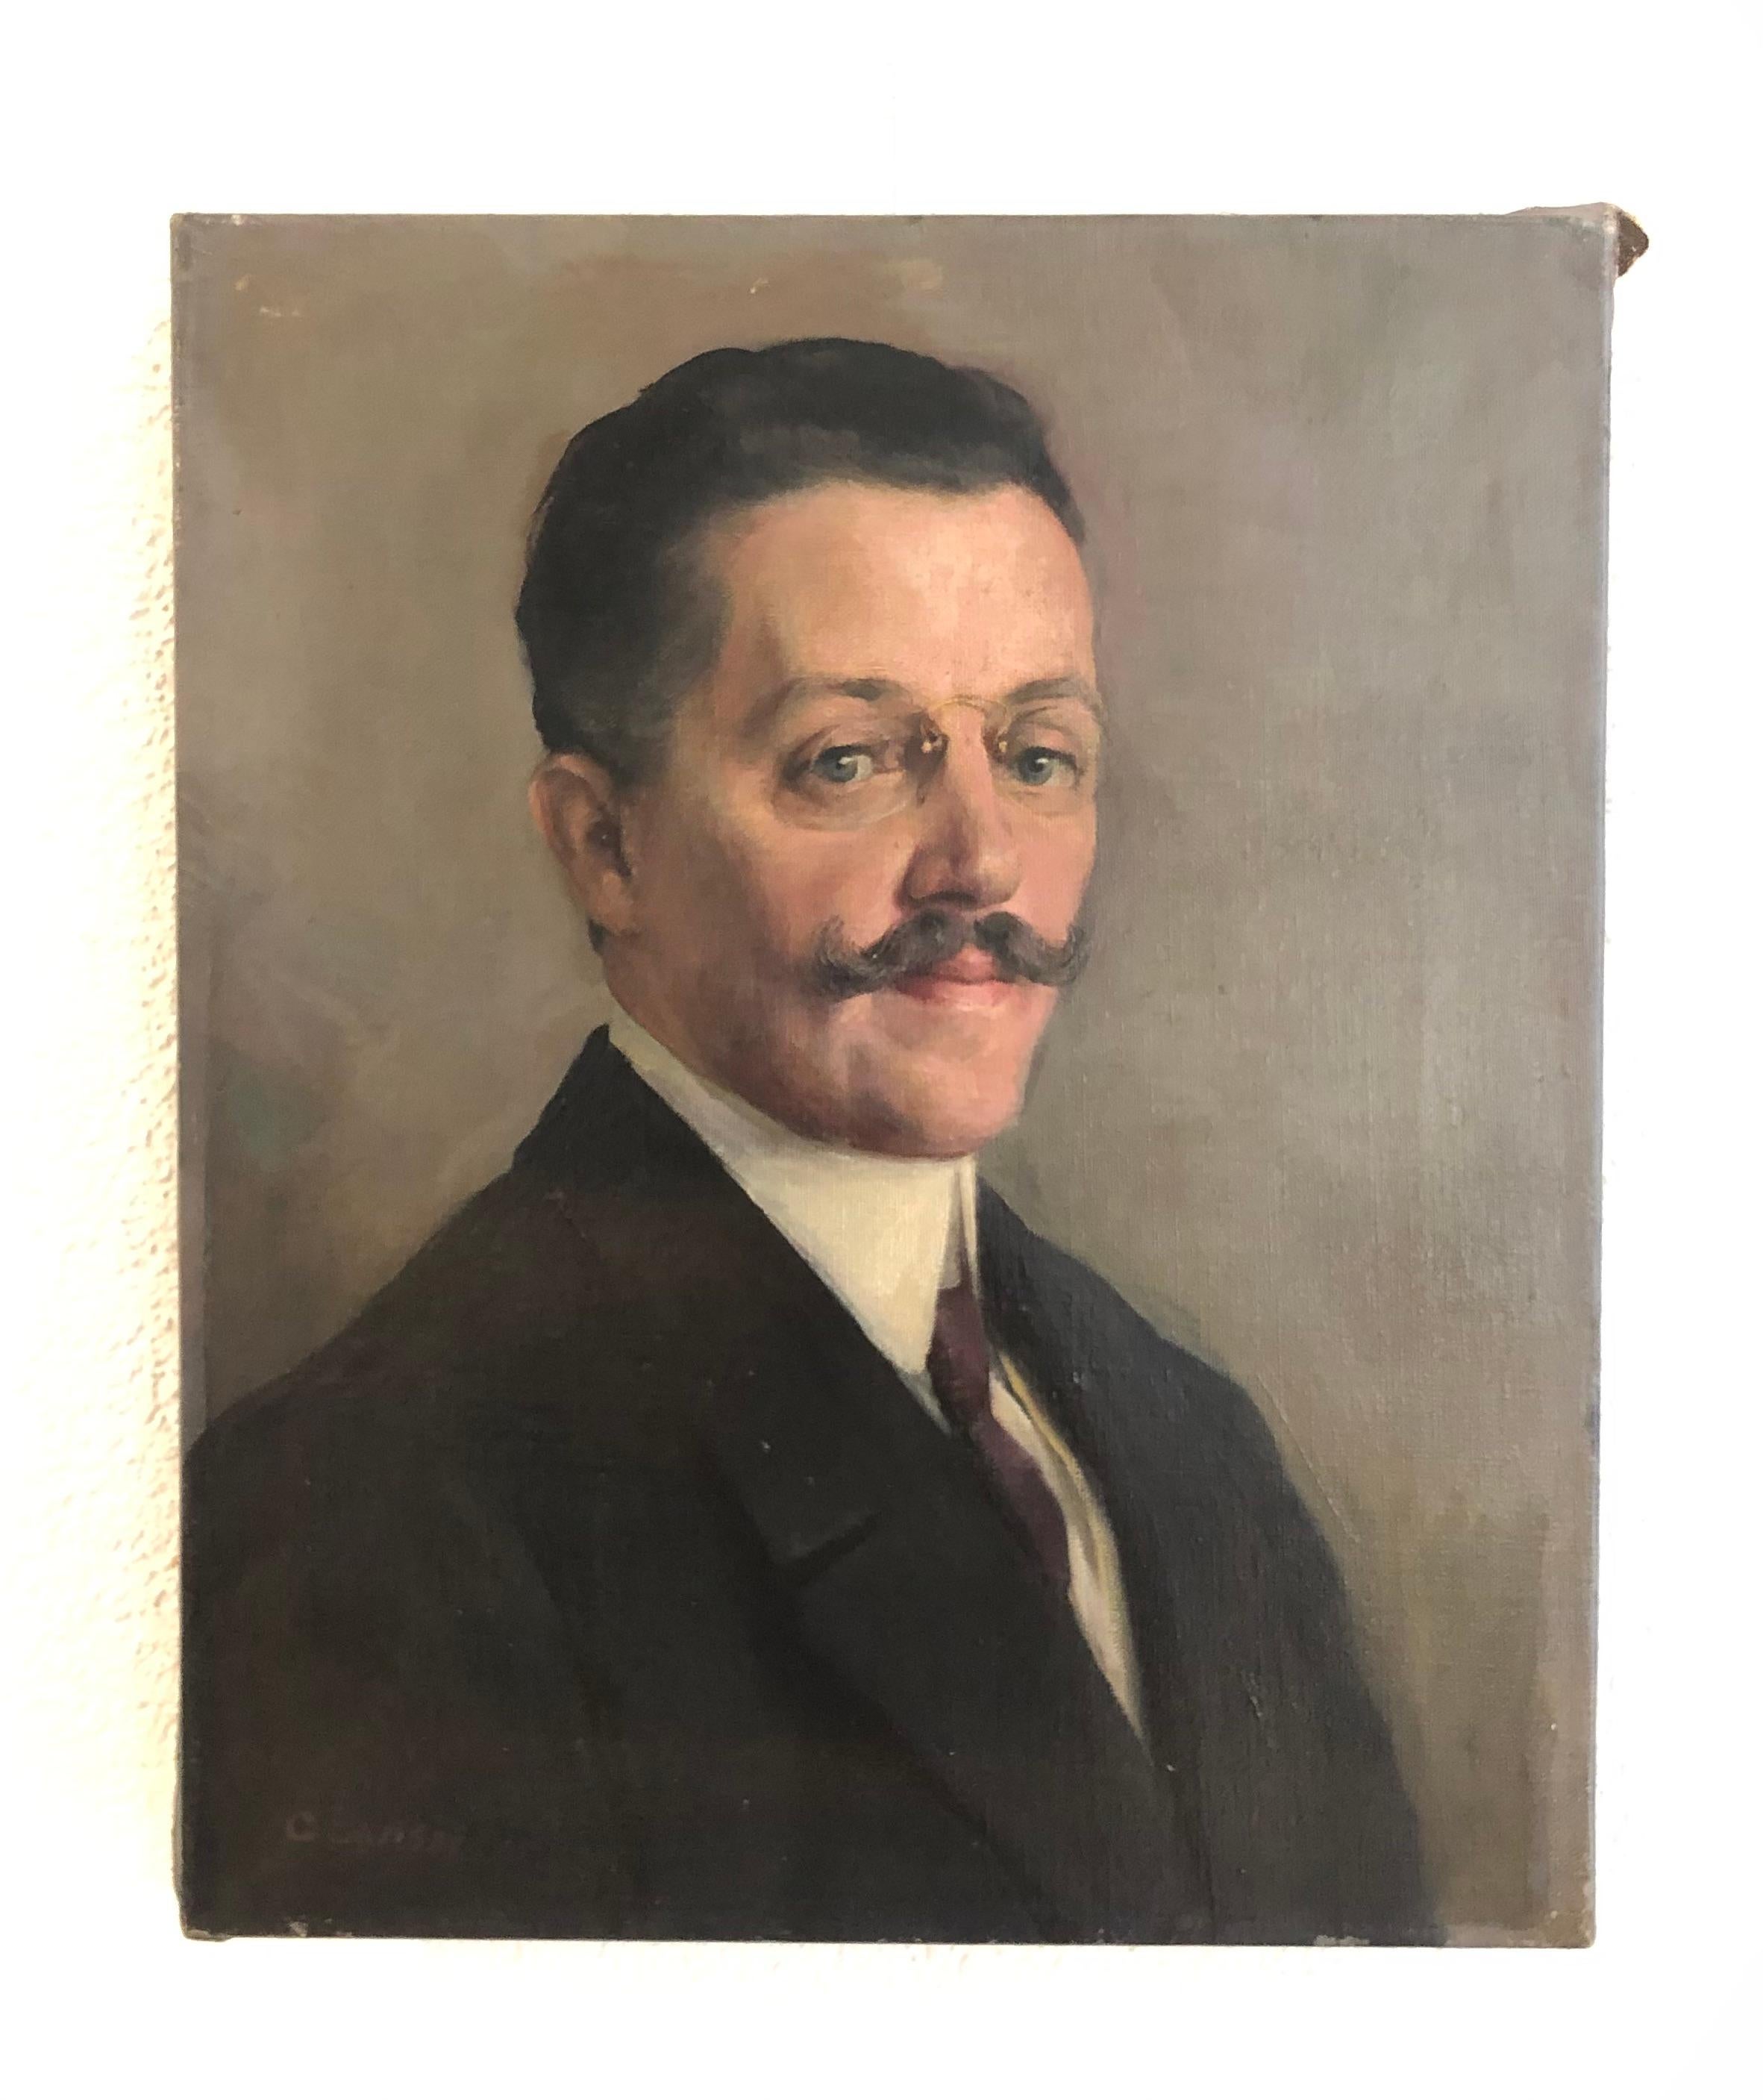 Man with mustache and glasses - Painting by Unknown